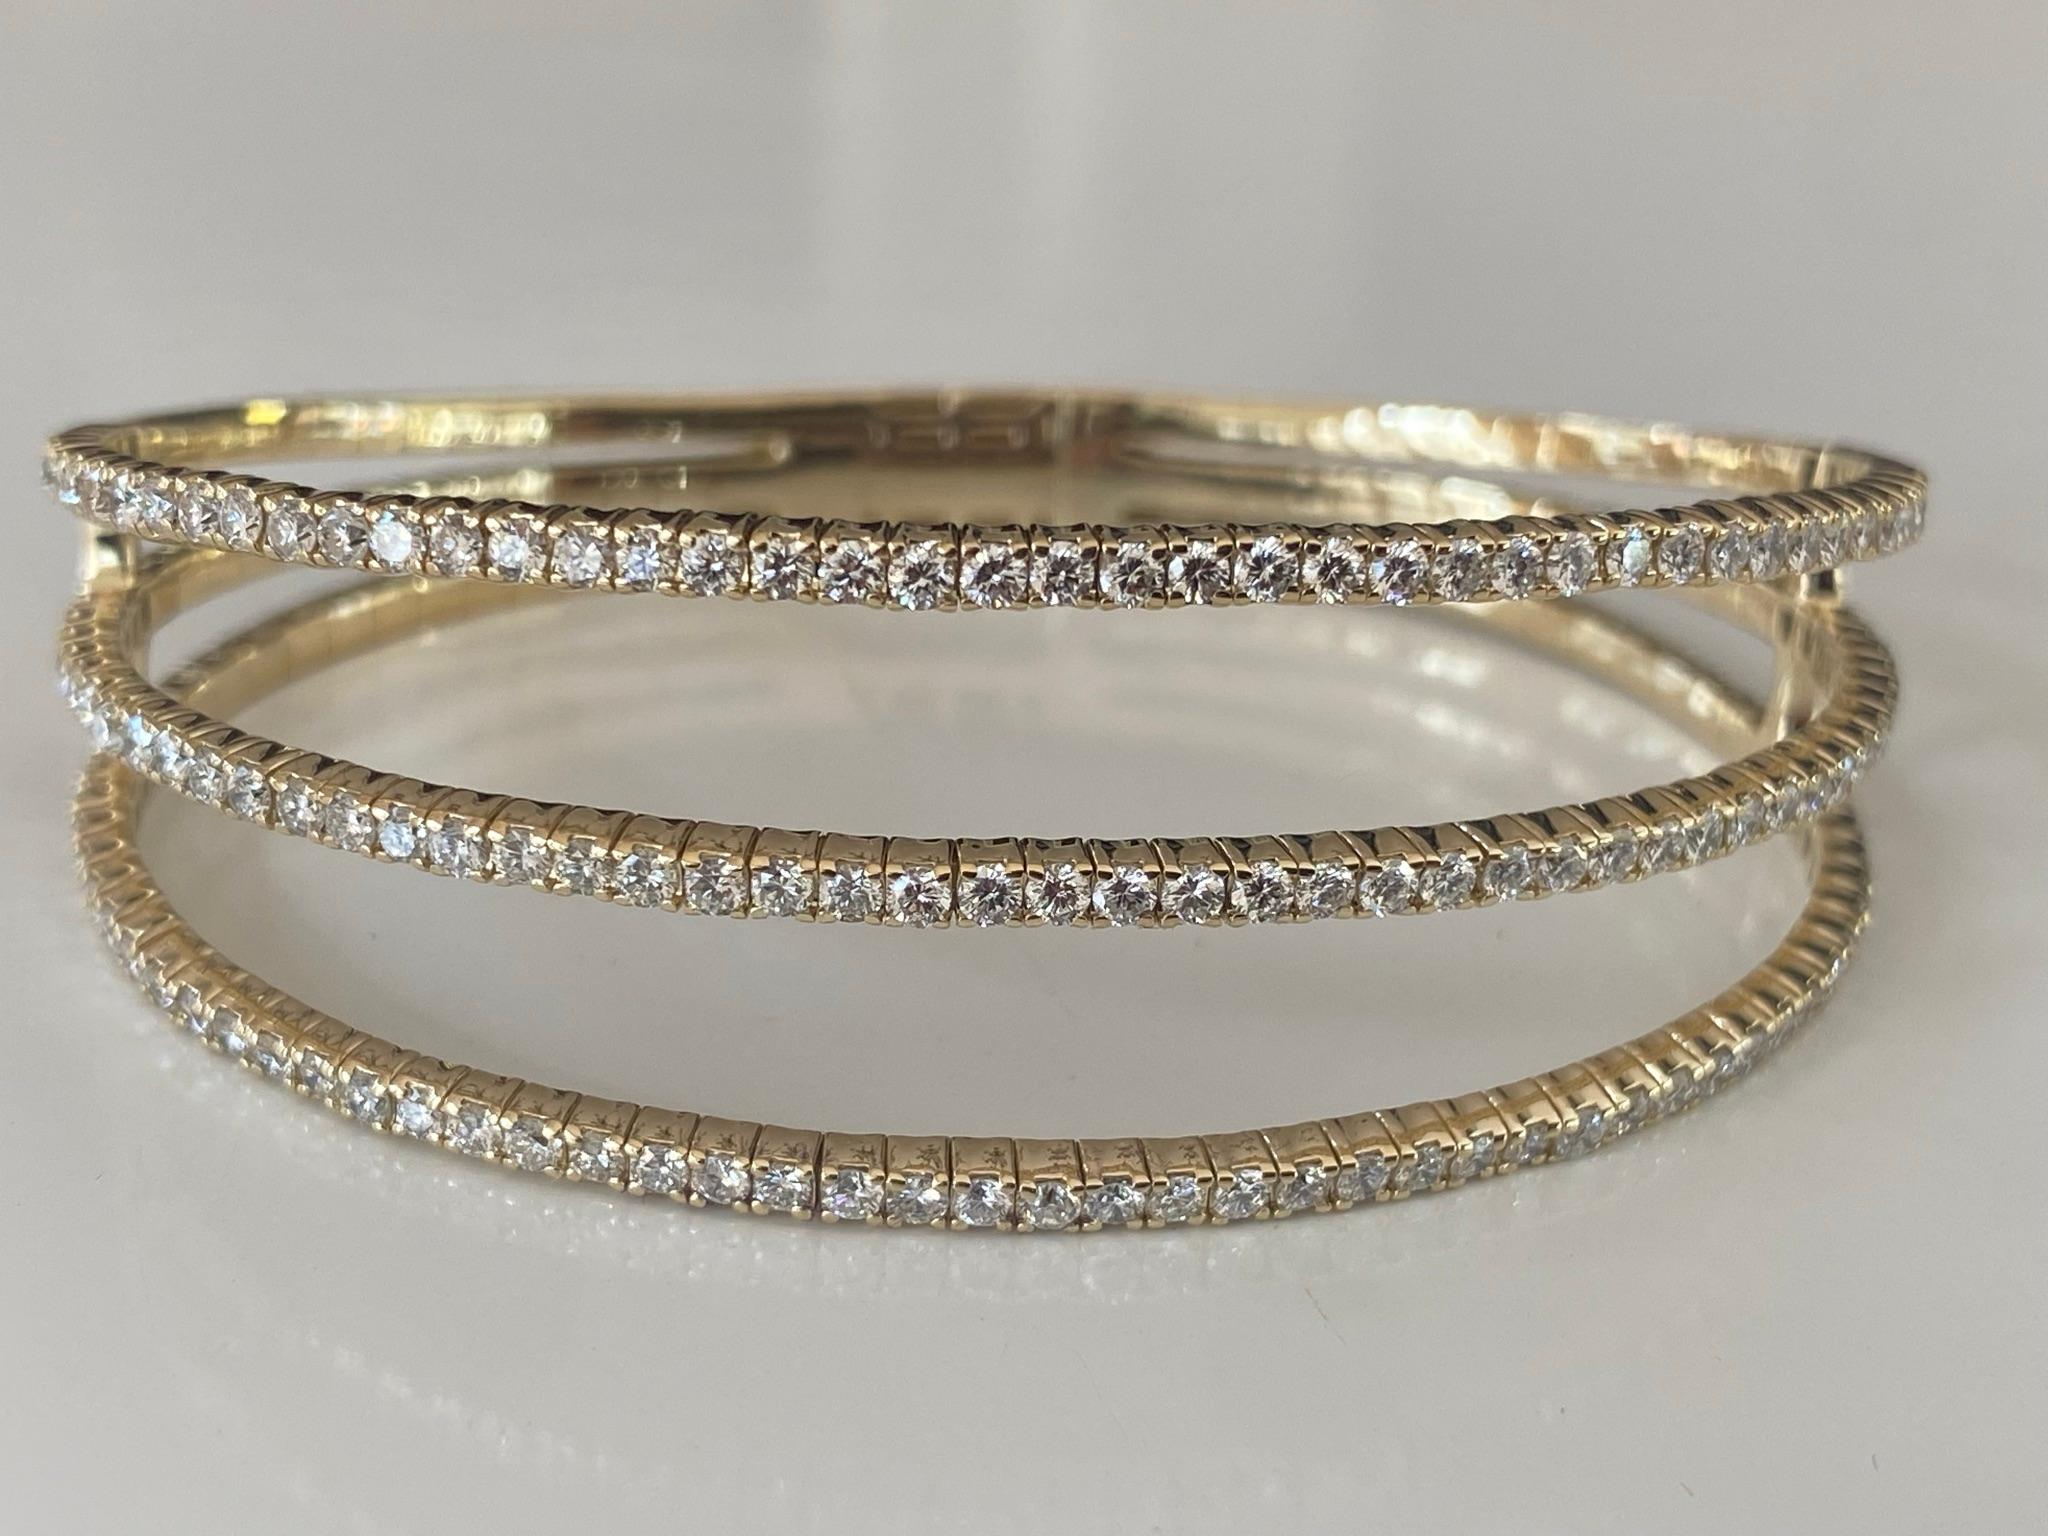 Crafted from 14kt yellow gold, this flexible bangle bracelet features 141 round diamonds, G color, VS-SI clarity that glisten over three rows. The diamonds total 3.47 carats and the bracelet measures 7 inches. 
